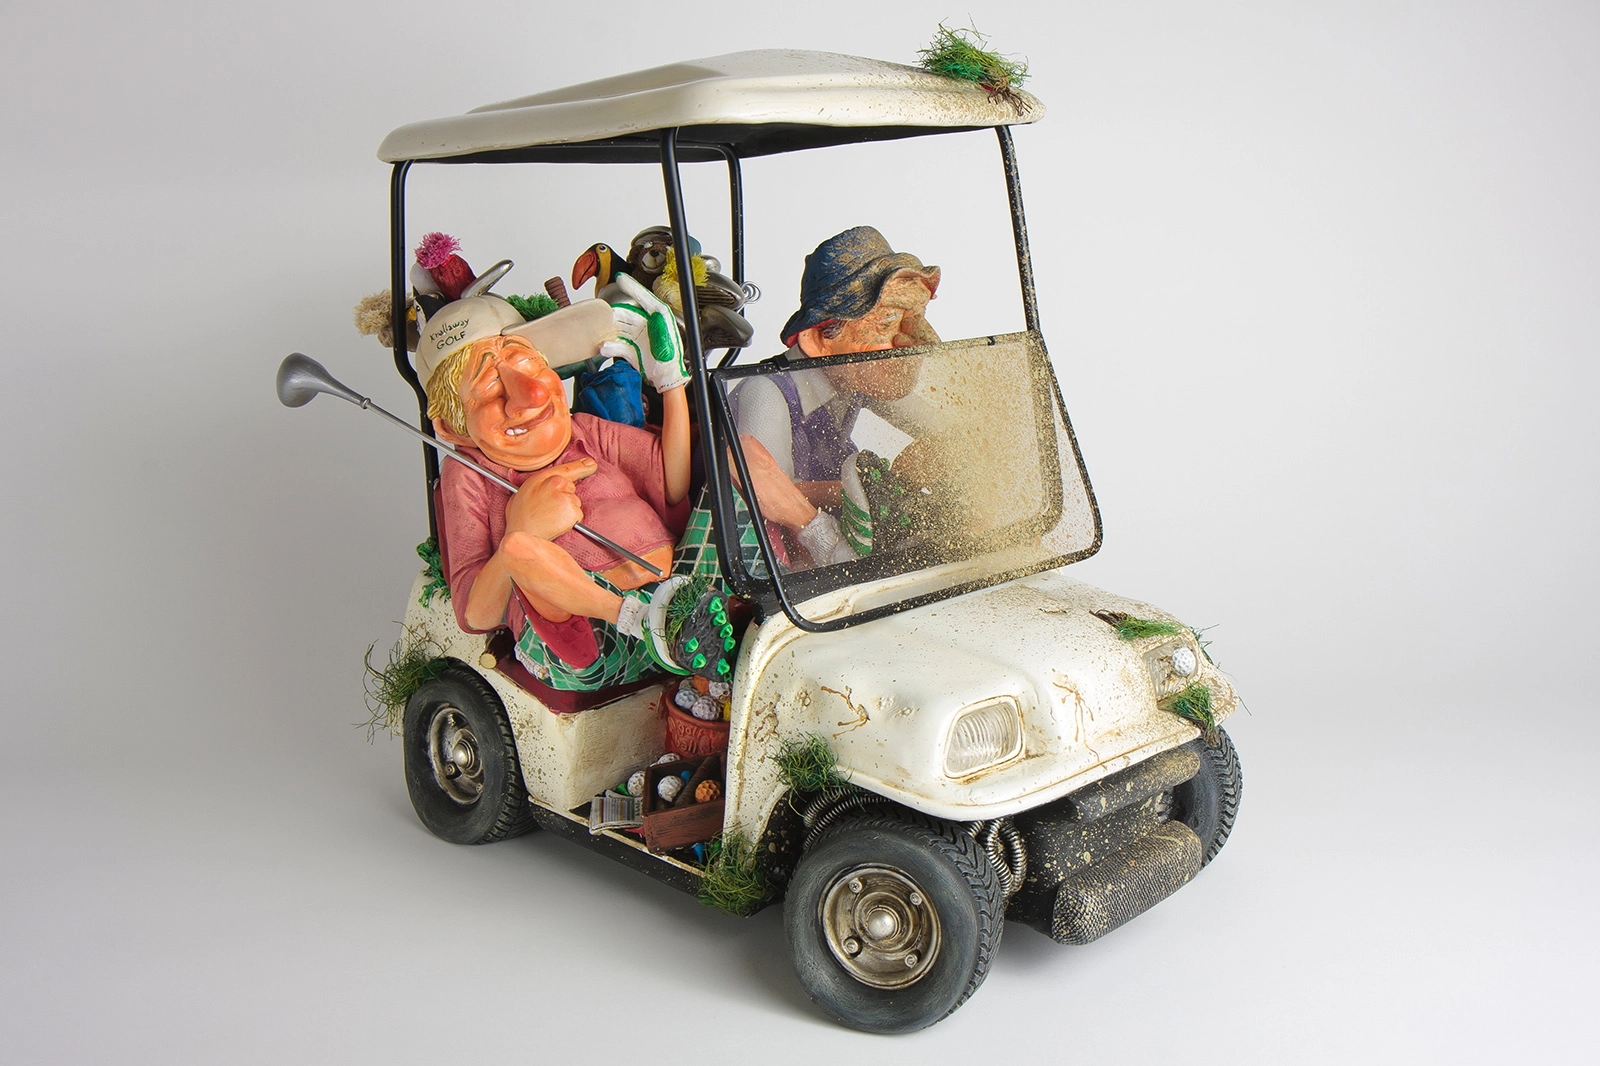 Guillermo Forchino The Buggy Buddies 1/2 Scale Comical Art Sculpture